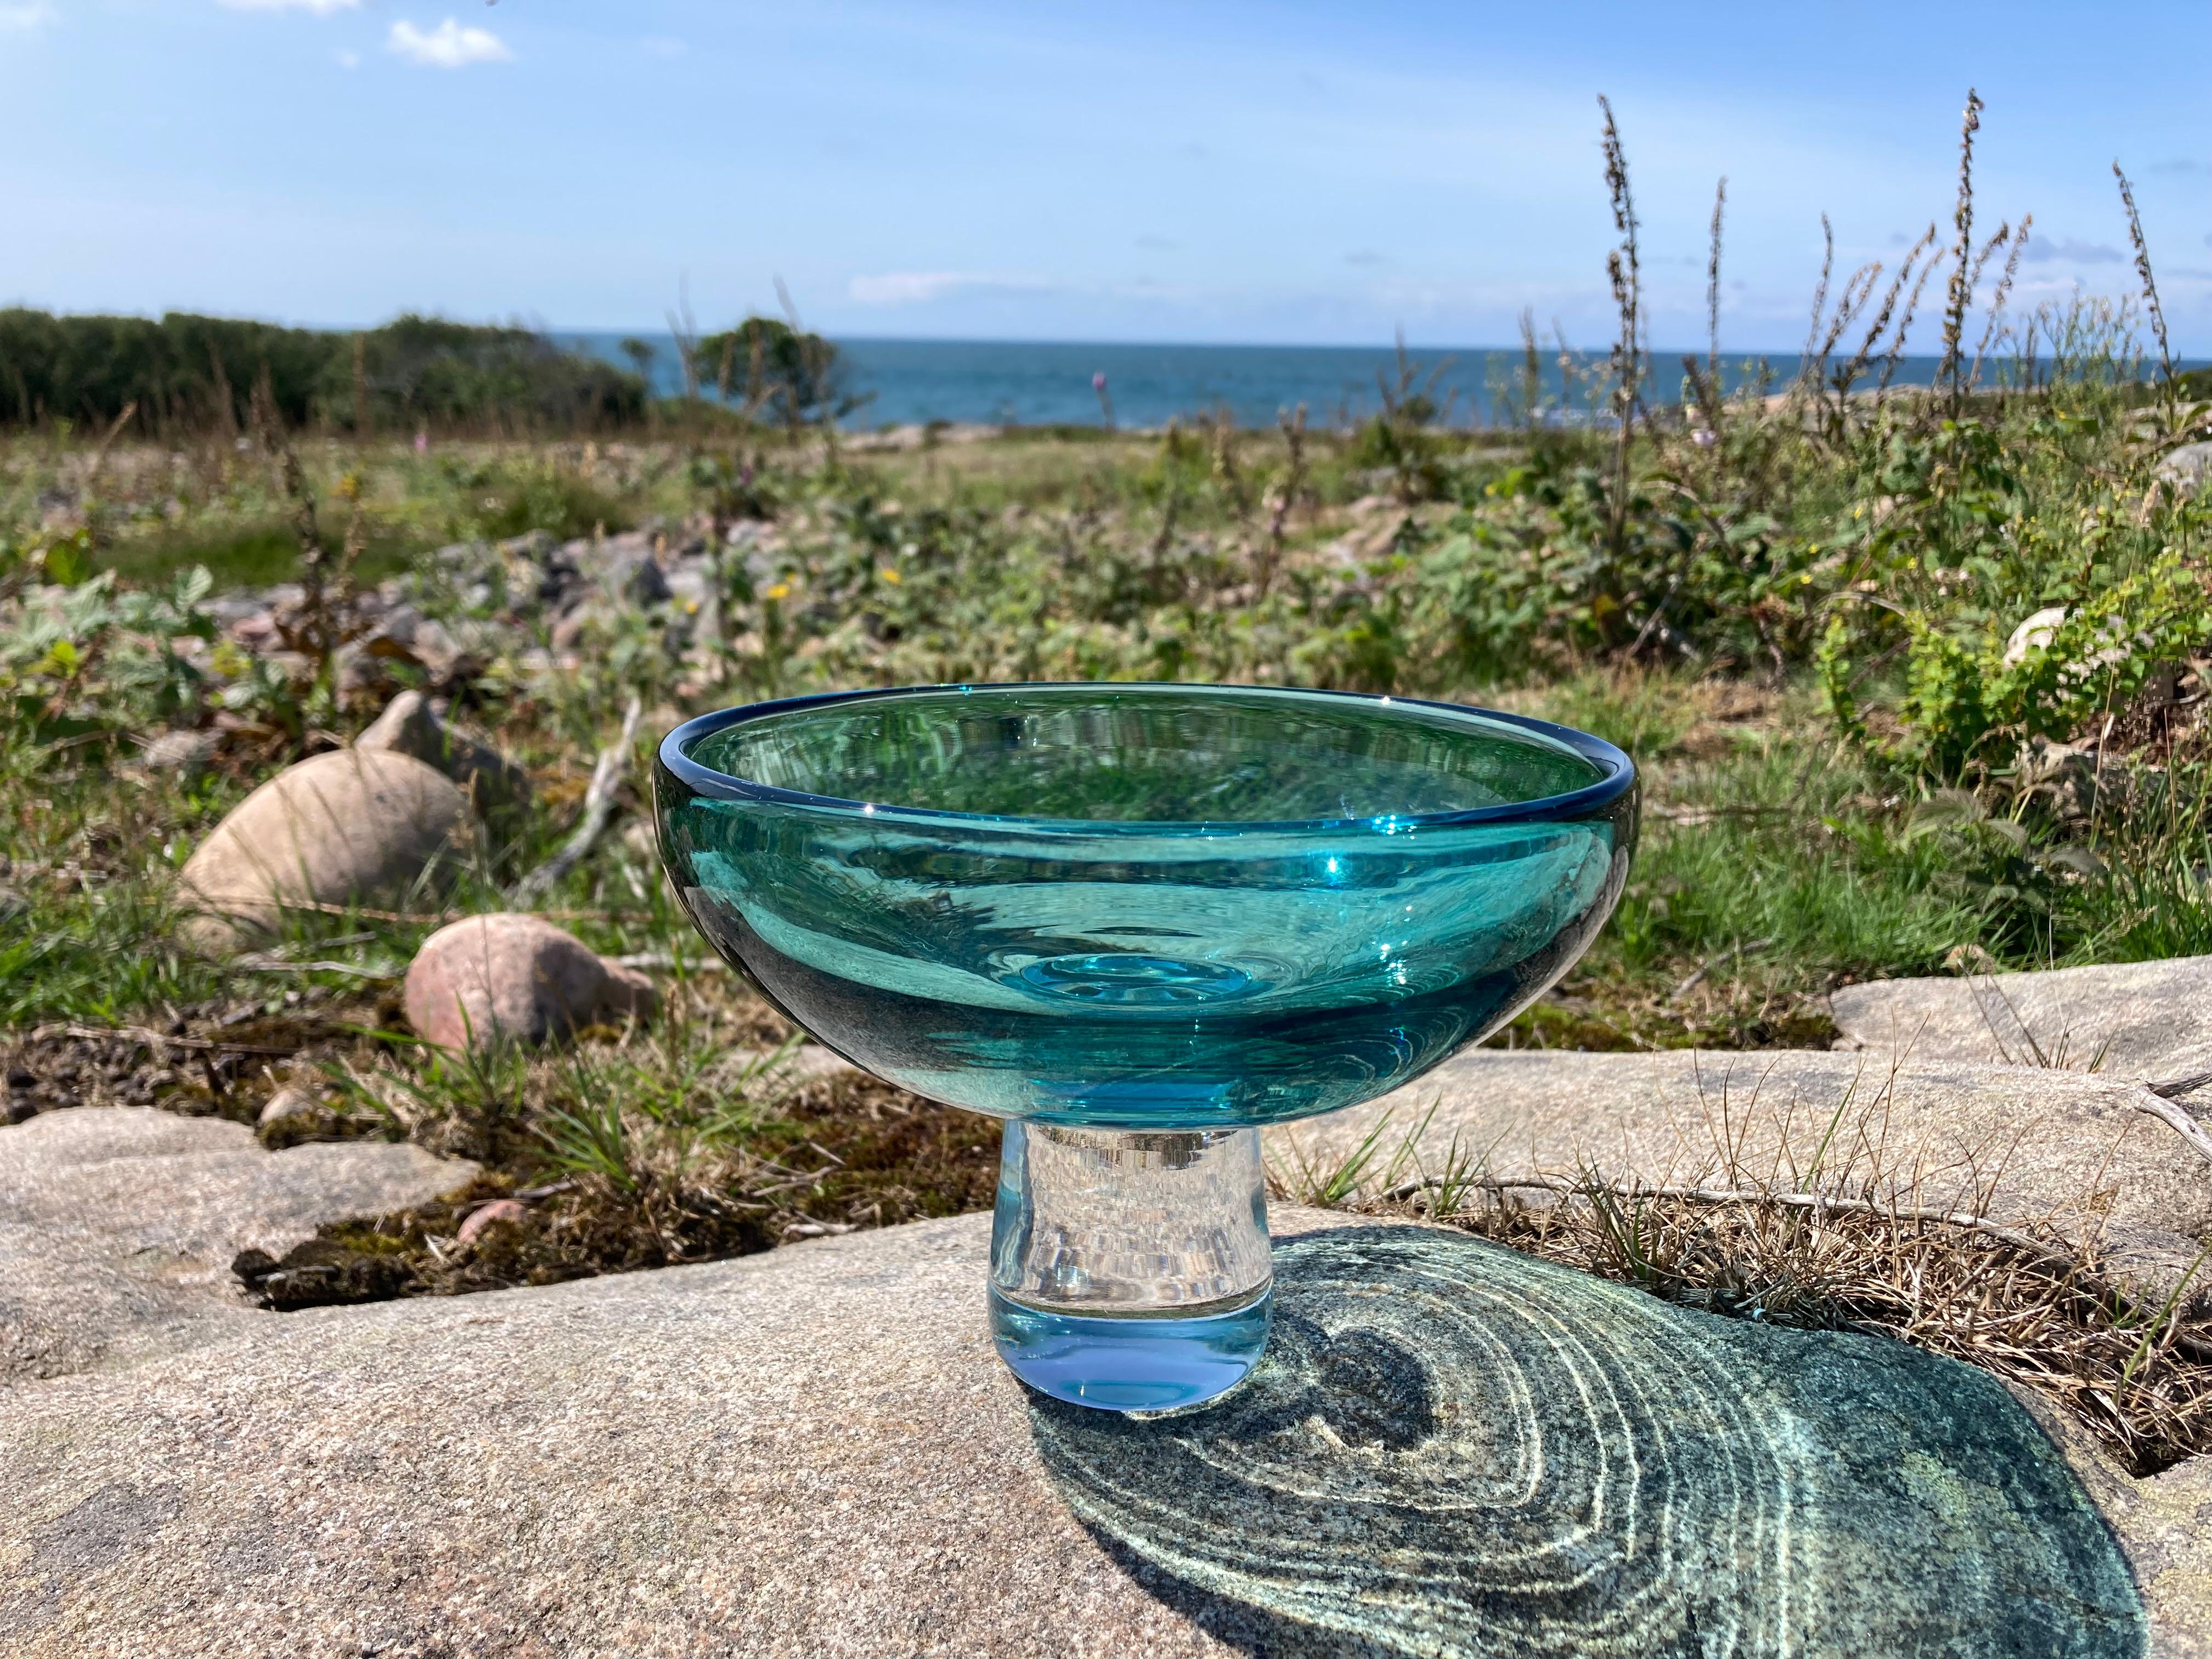 This vintage art glass pedestal bowl is unsigned but is presumed to have been made by the famous Swedish glassmaker Kosta Boda. It has the typical clean lines of a mid-century Scandinavian art glass piece and most likely dates from the 1950/60s.